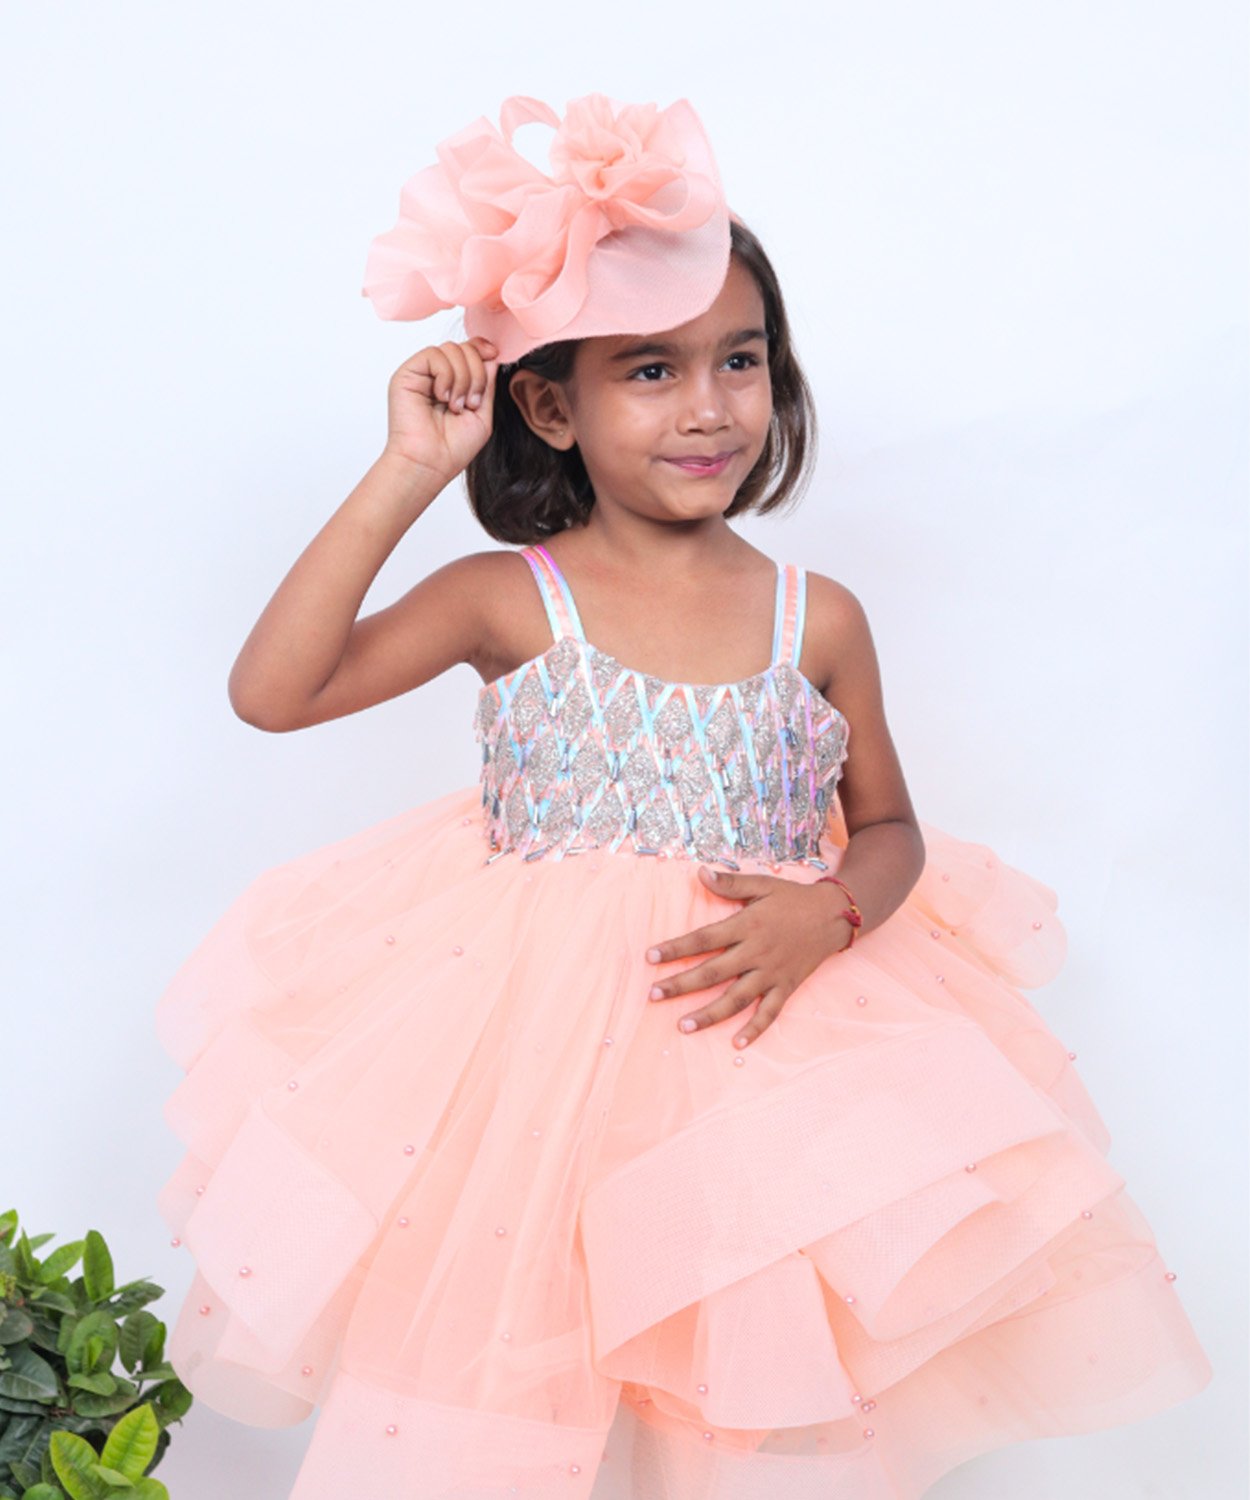 Peach Frock With Sequined Bodice, Layered Skirt, And Matching Ruffled Headpiece.